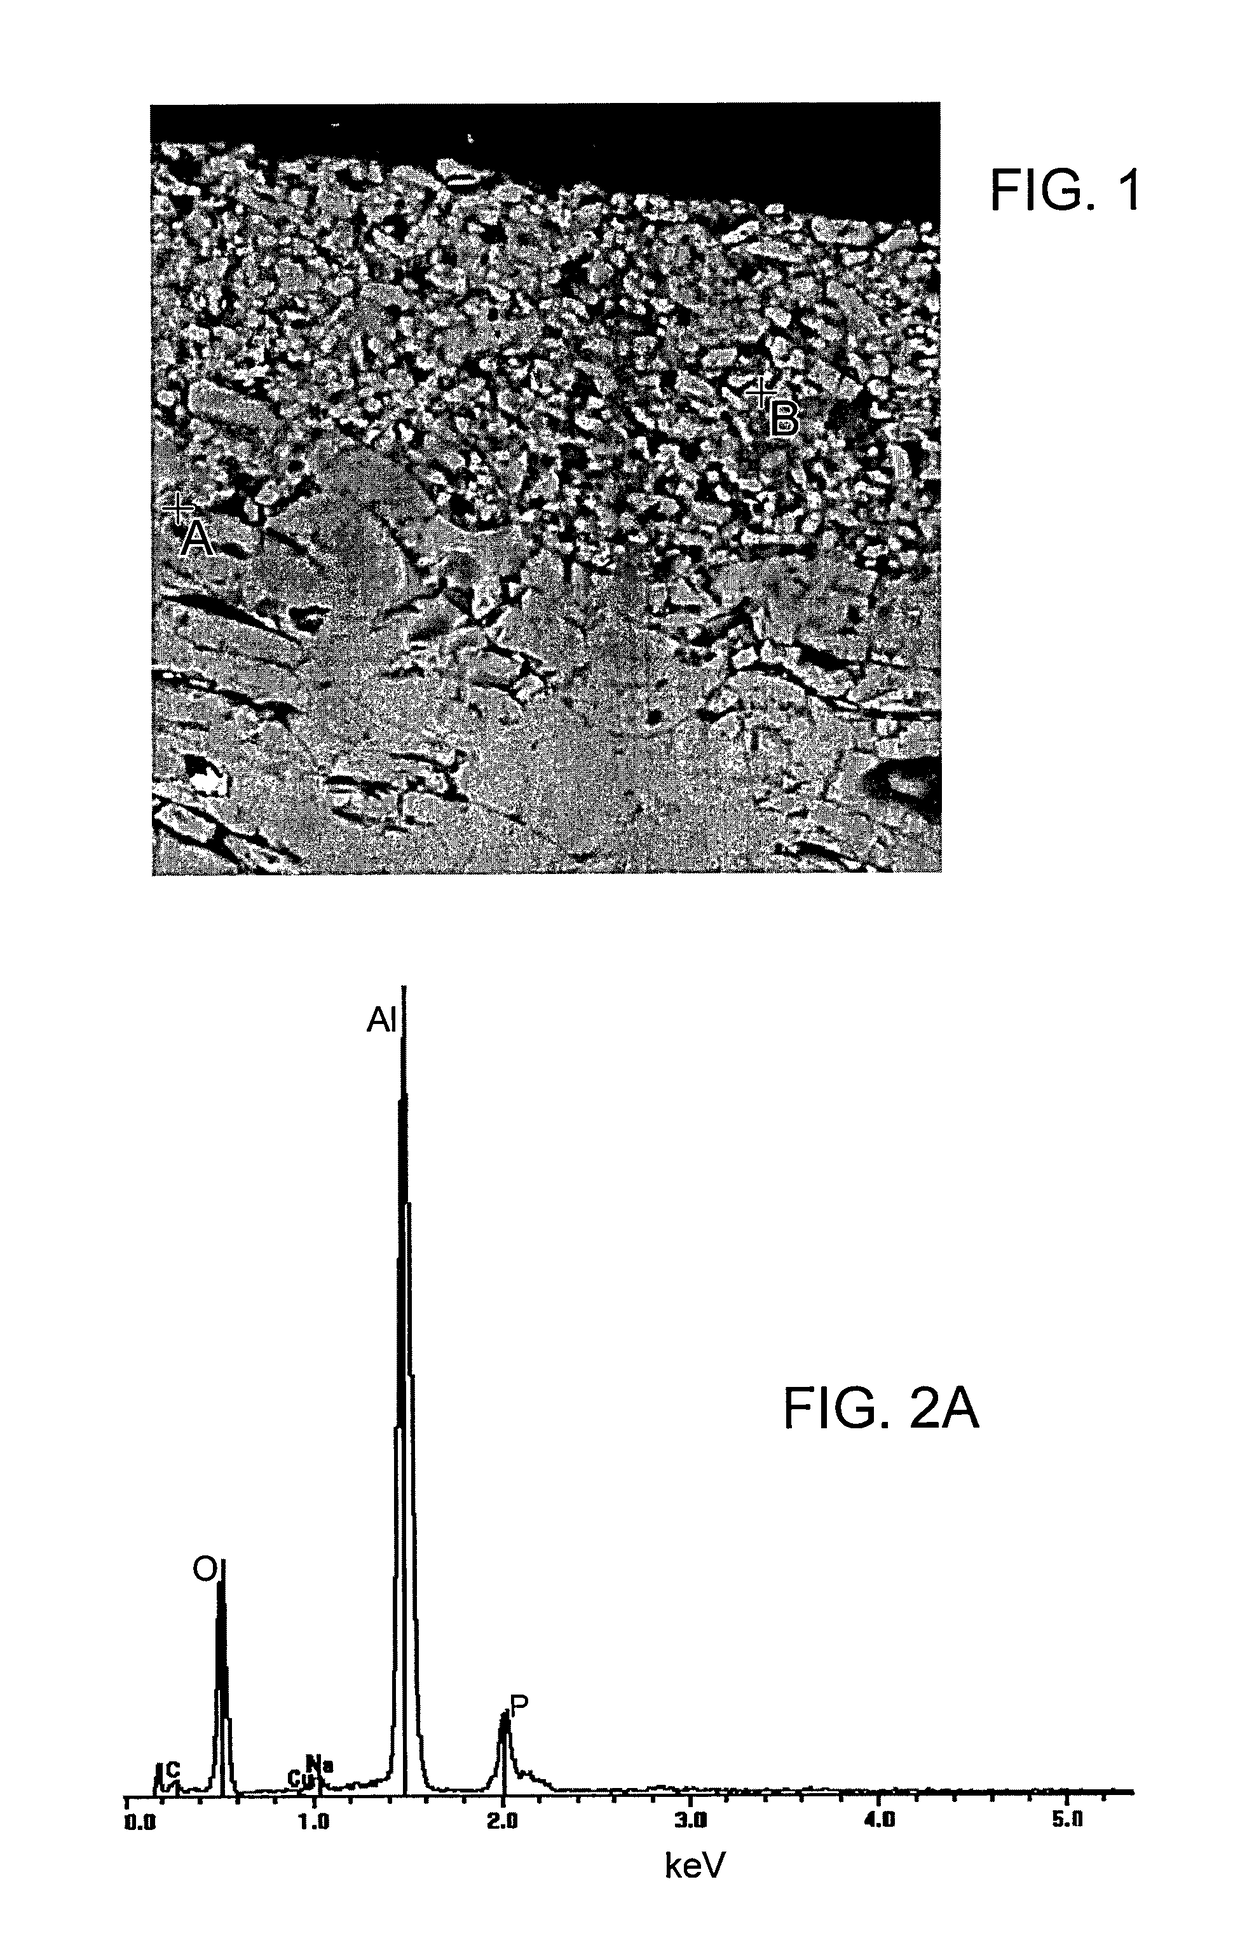 Method to improve the thermal properties of a resistance element embedded in an alumina deposit on a surface of a substrate and application of said method